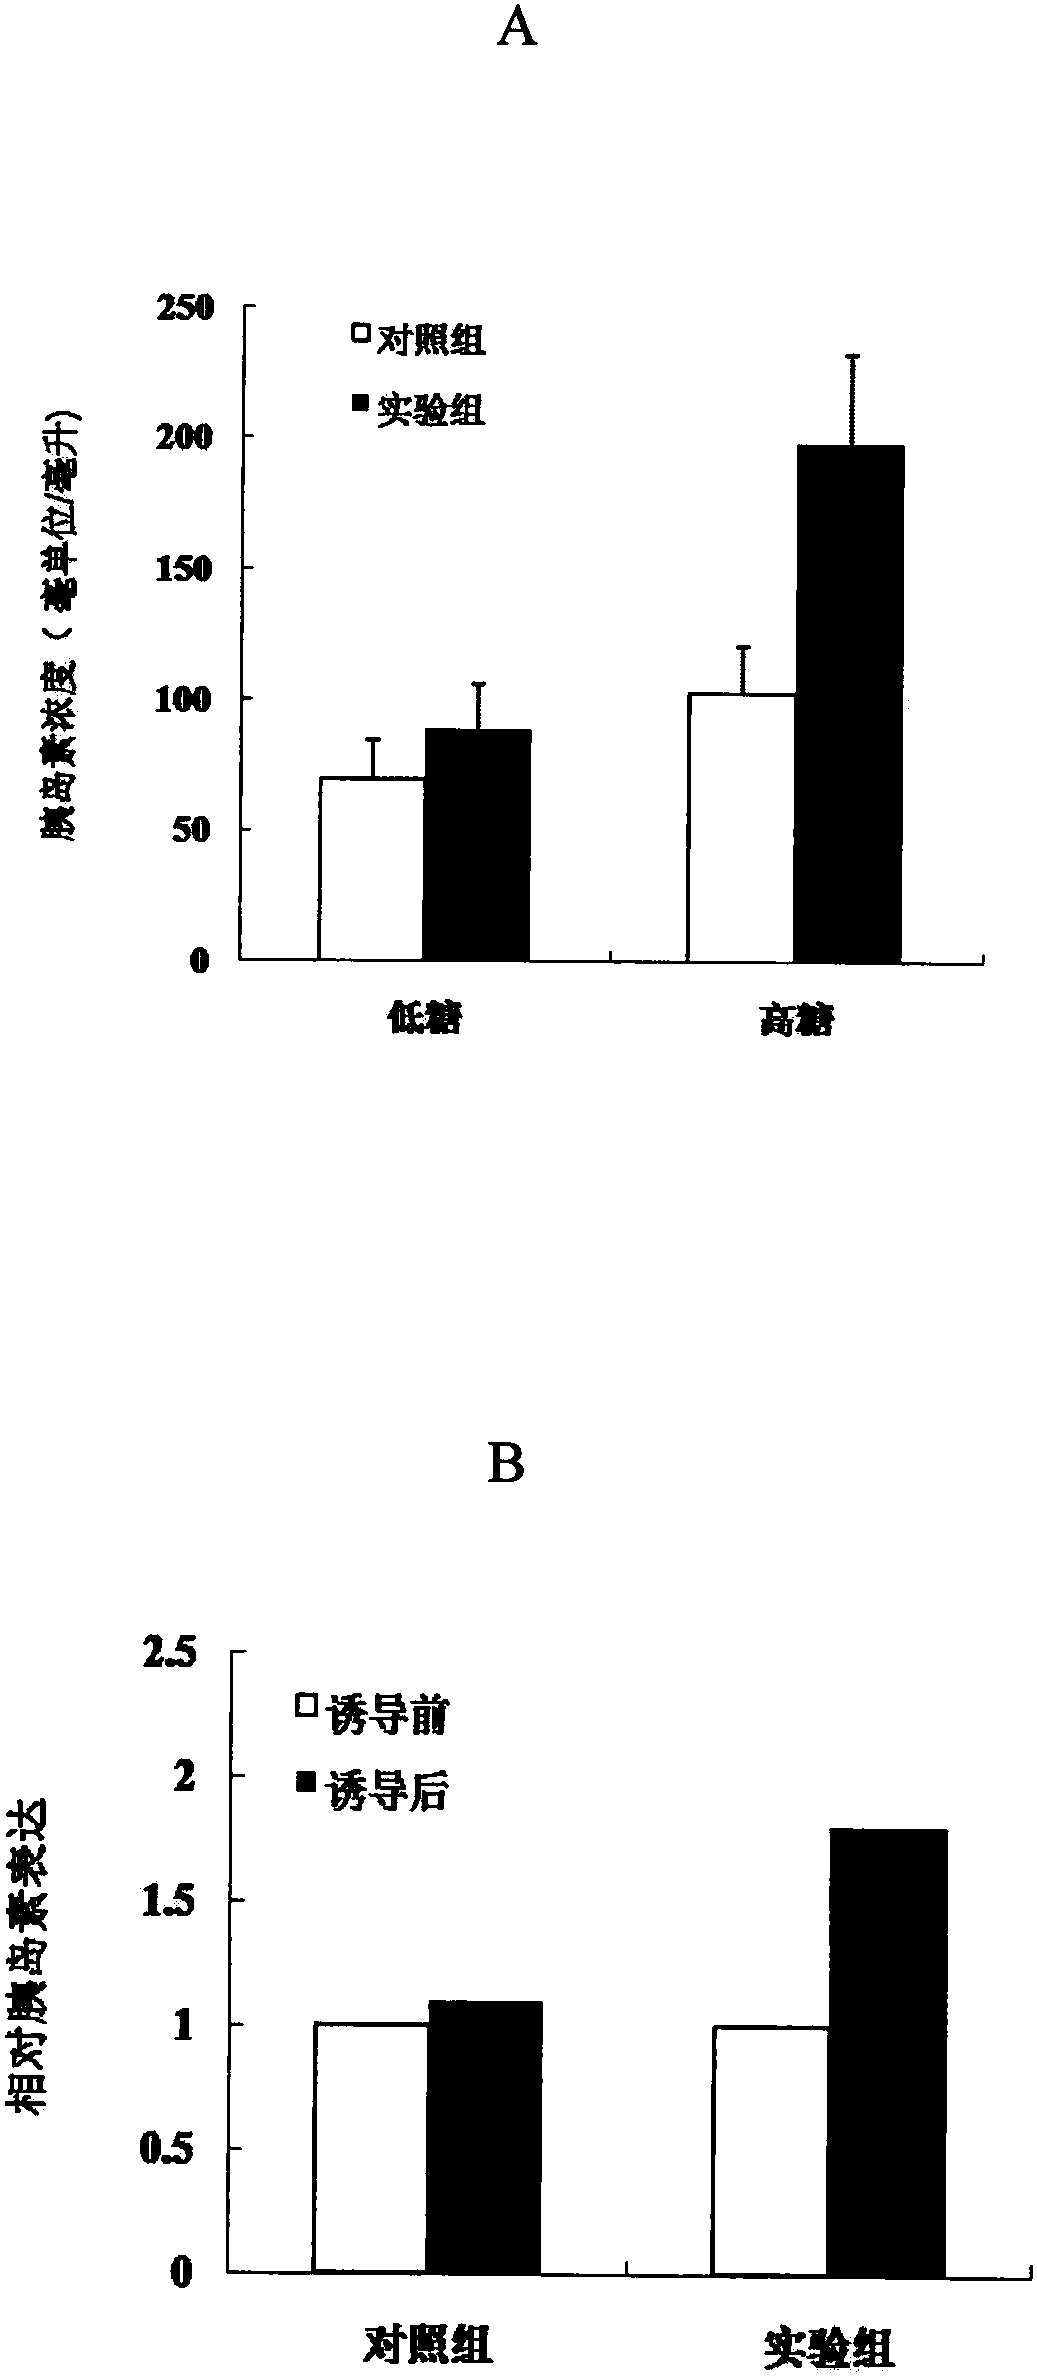 Culture additive for in-vitro induction of stem cells to insulin-secretion cells differentiation maturation and purpose thereof